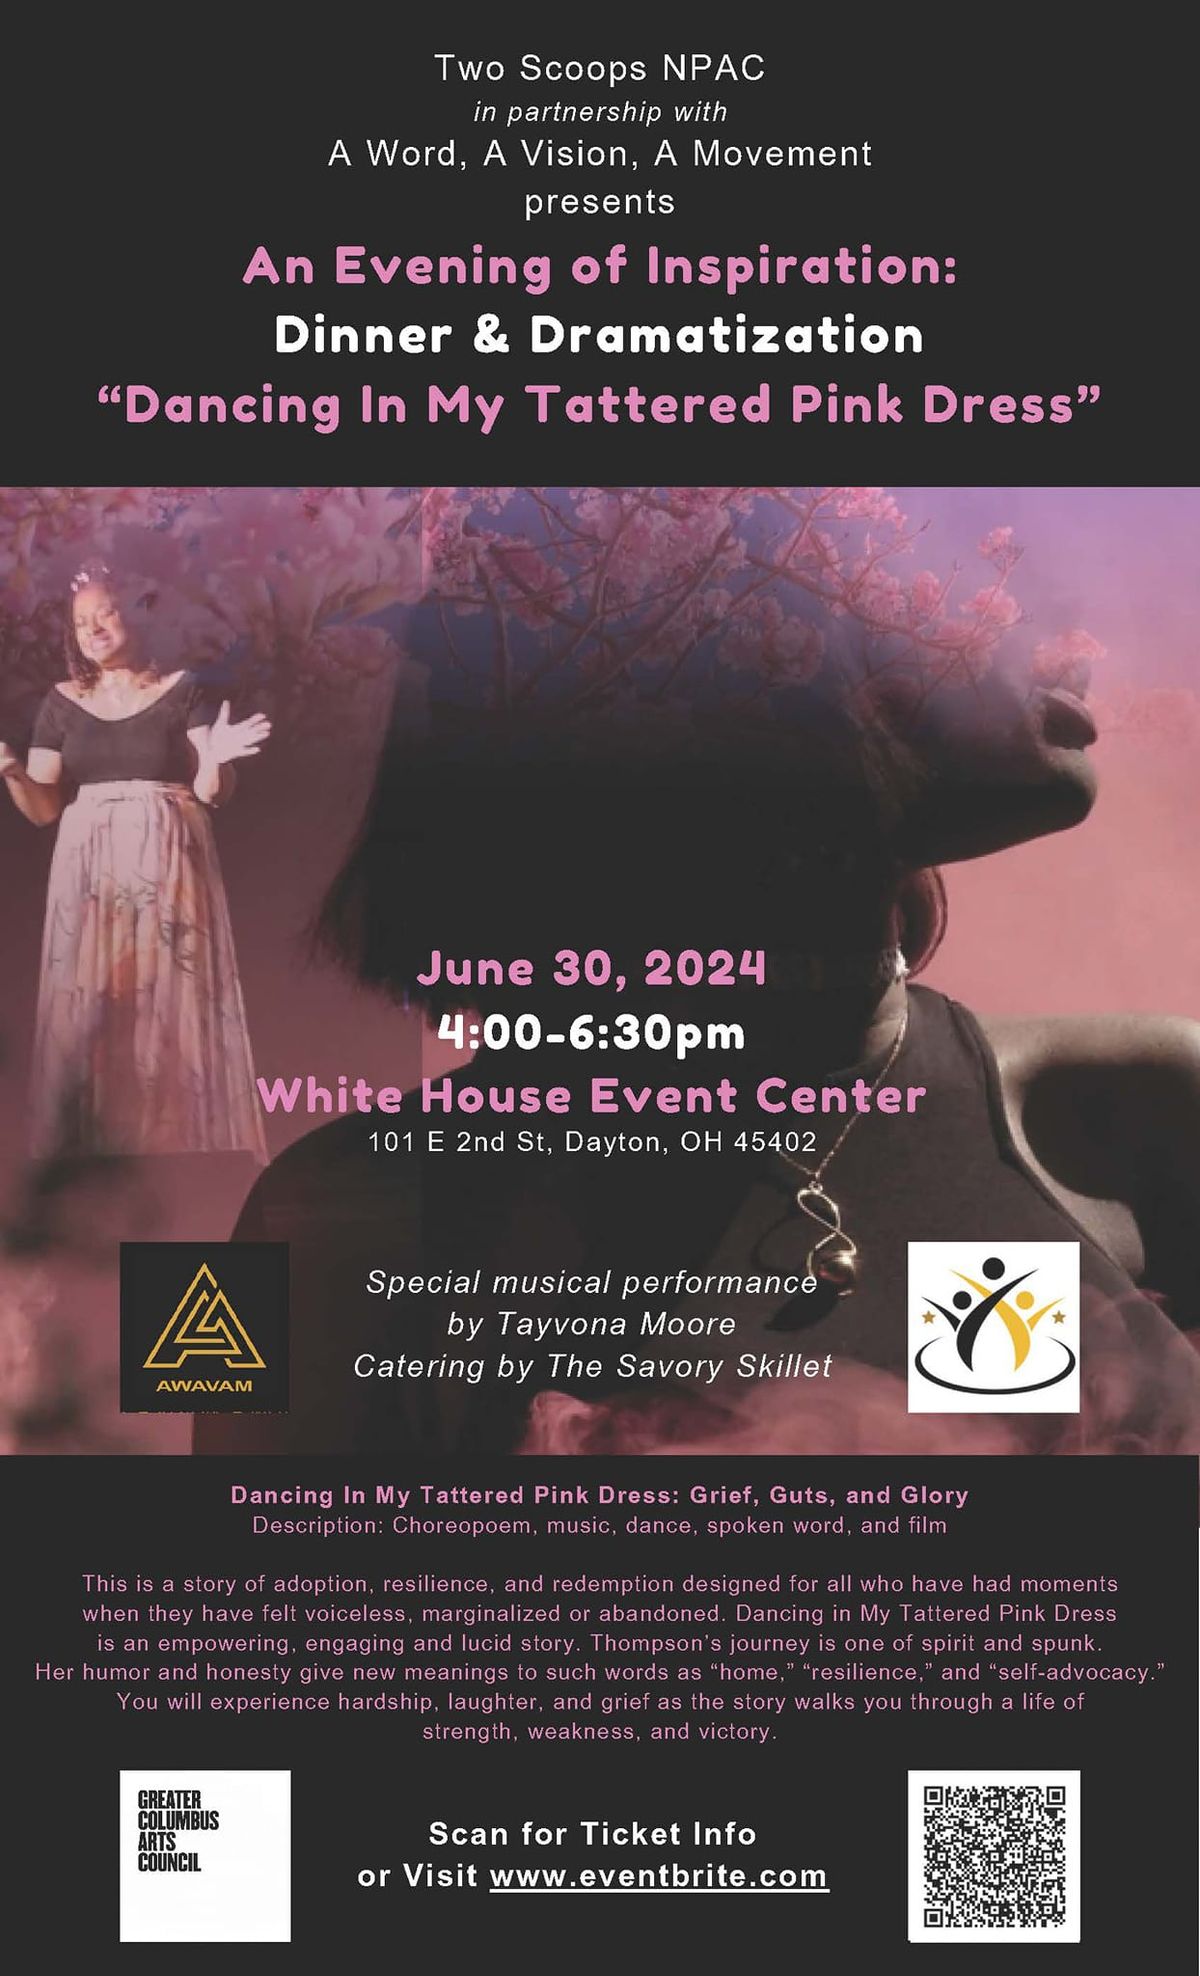 An Evening of Inspiration: "Dancing in My Tattered Pink Dress" 